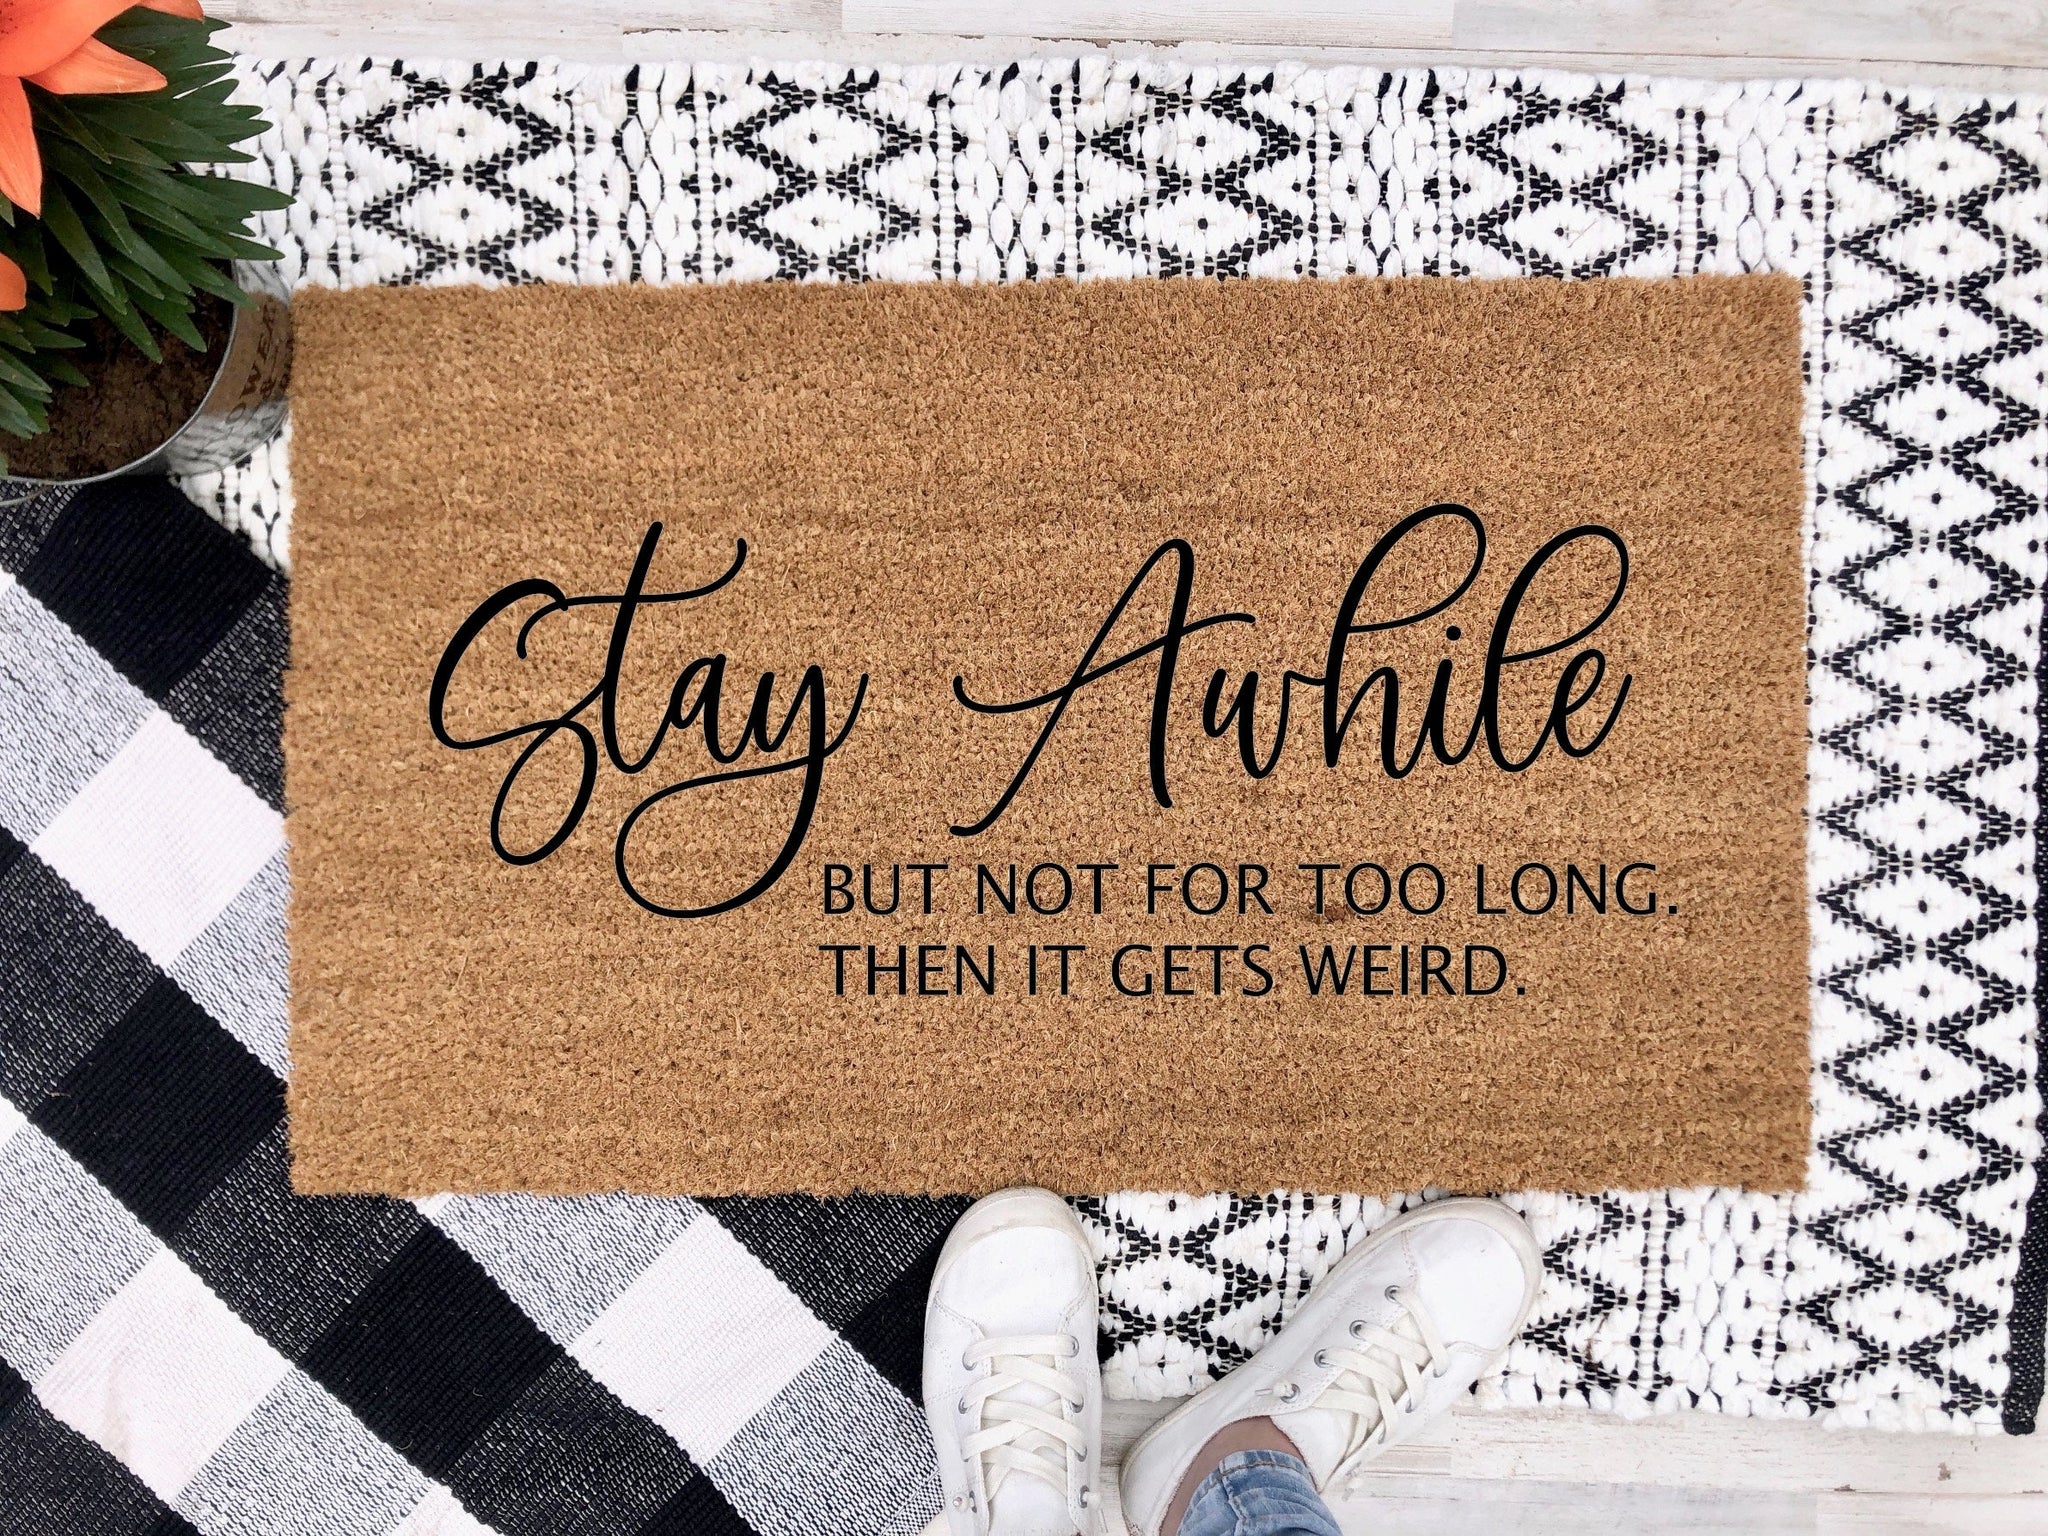 Hello from the other siiiide!' Clever porch mats you can make yourself -  Studio 5